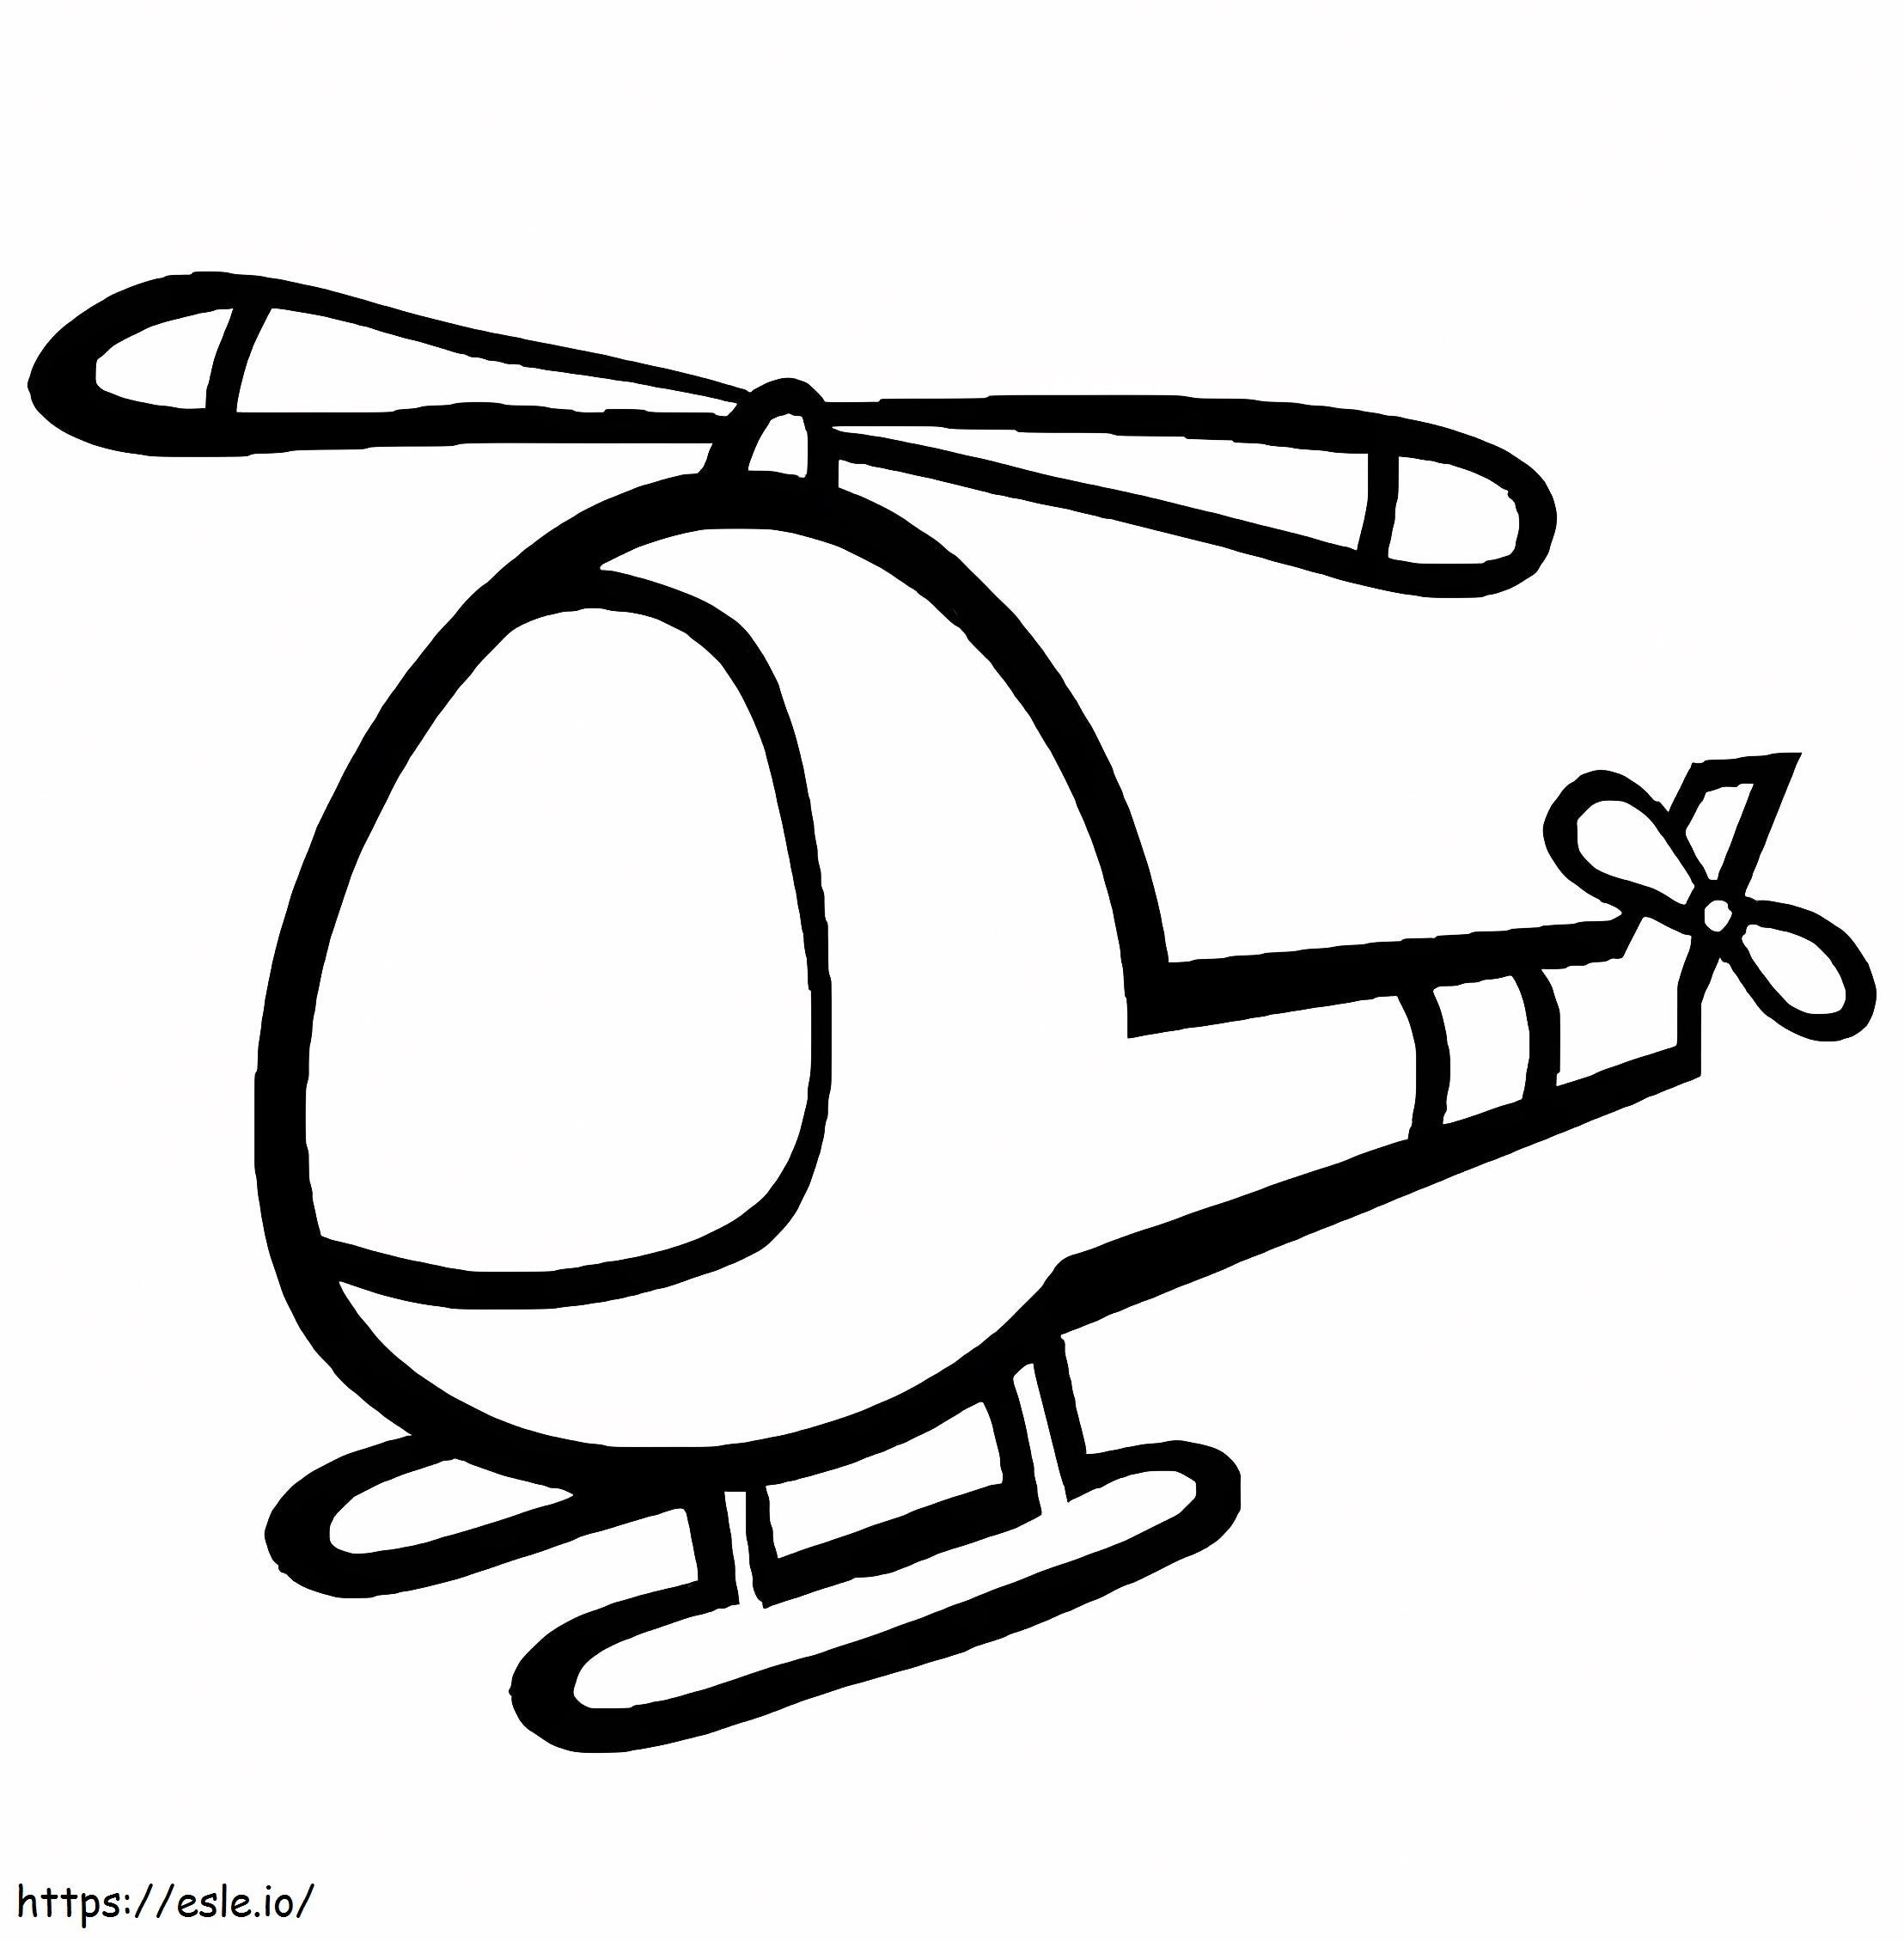 Helicopter Drawing coloring page